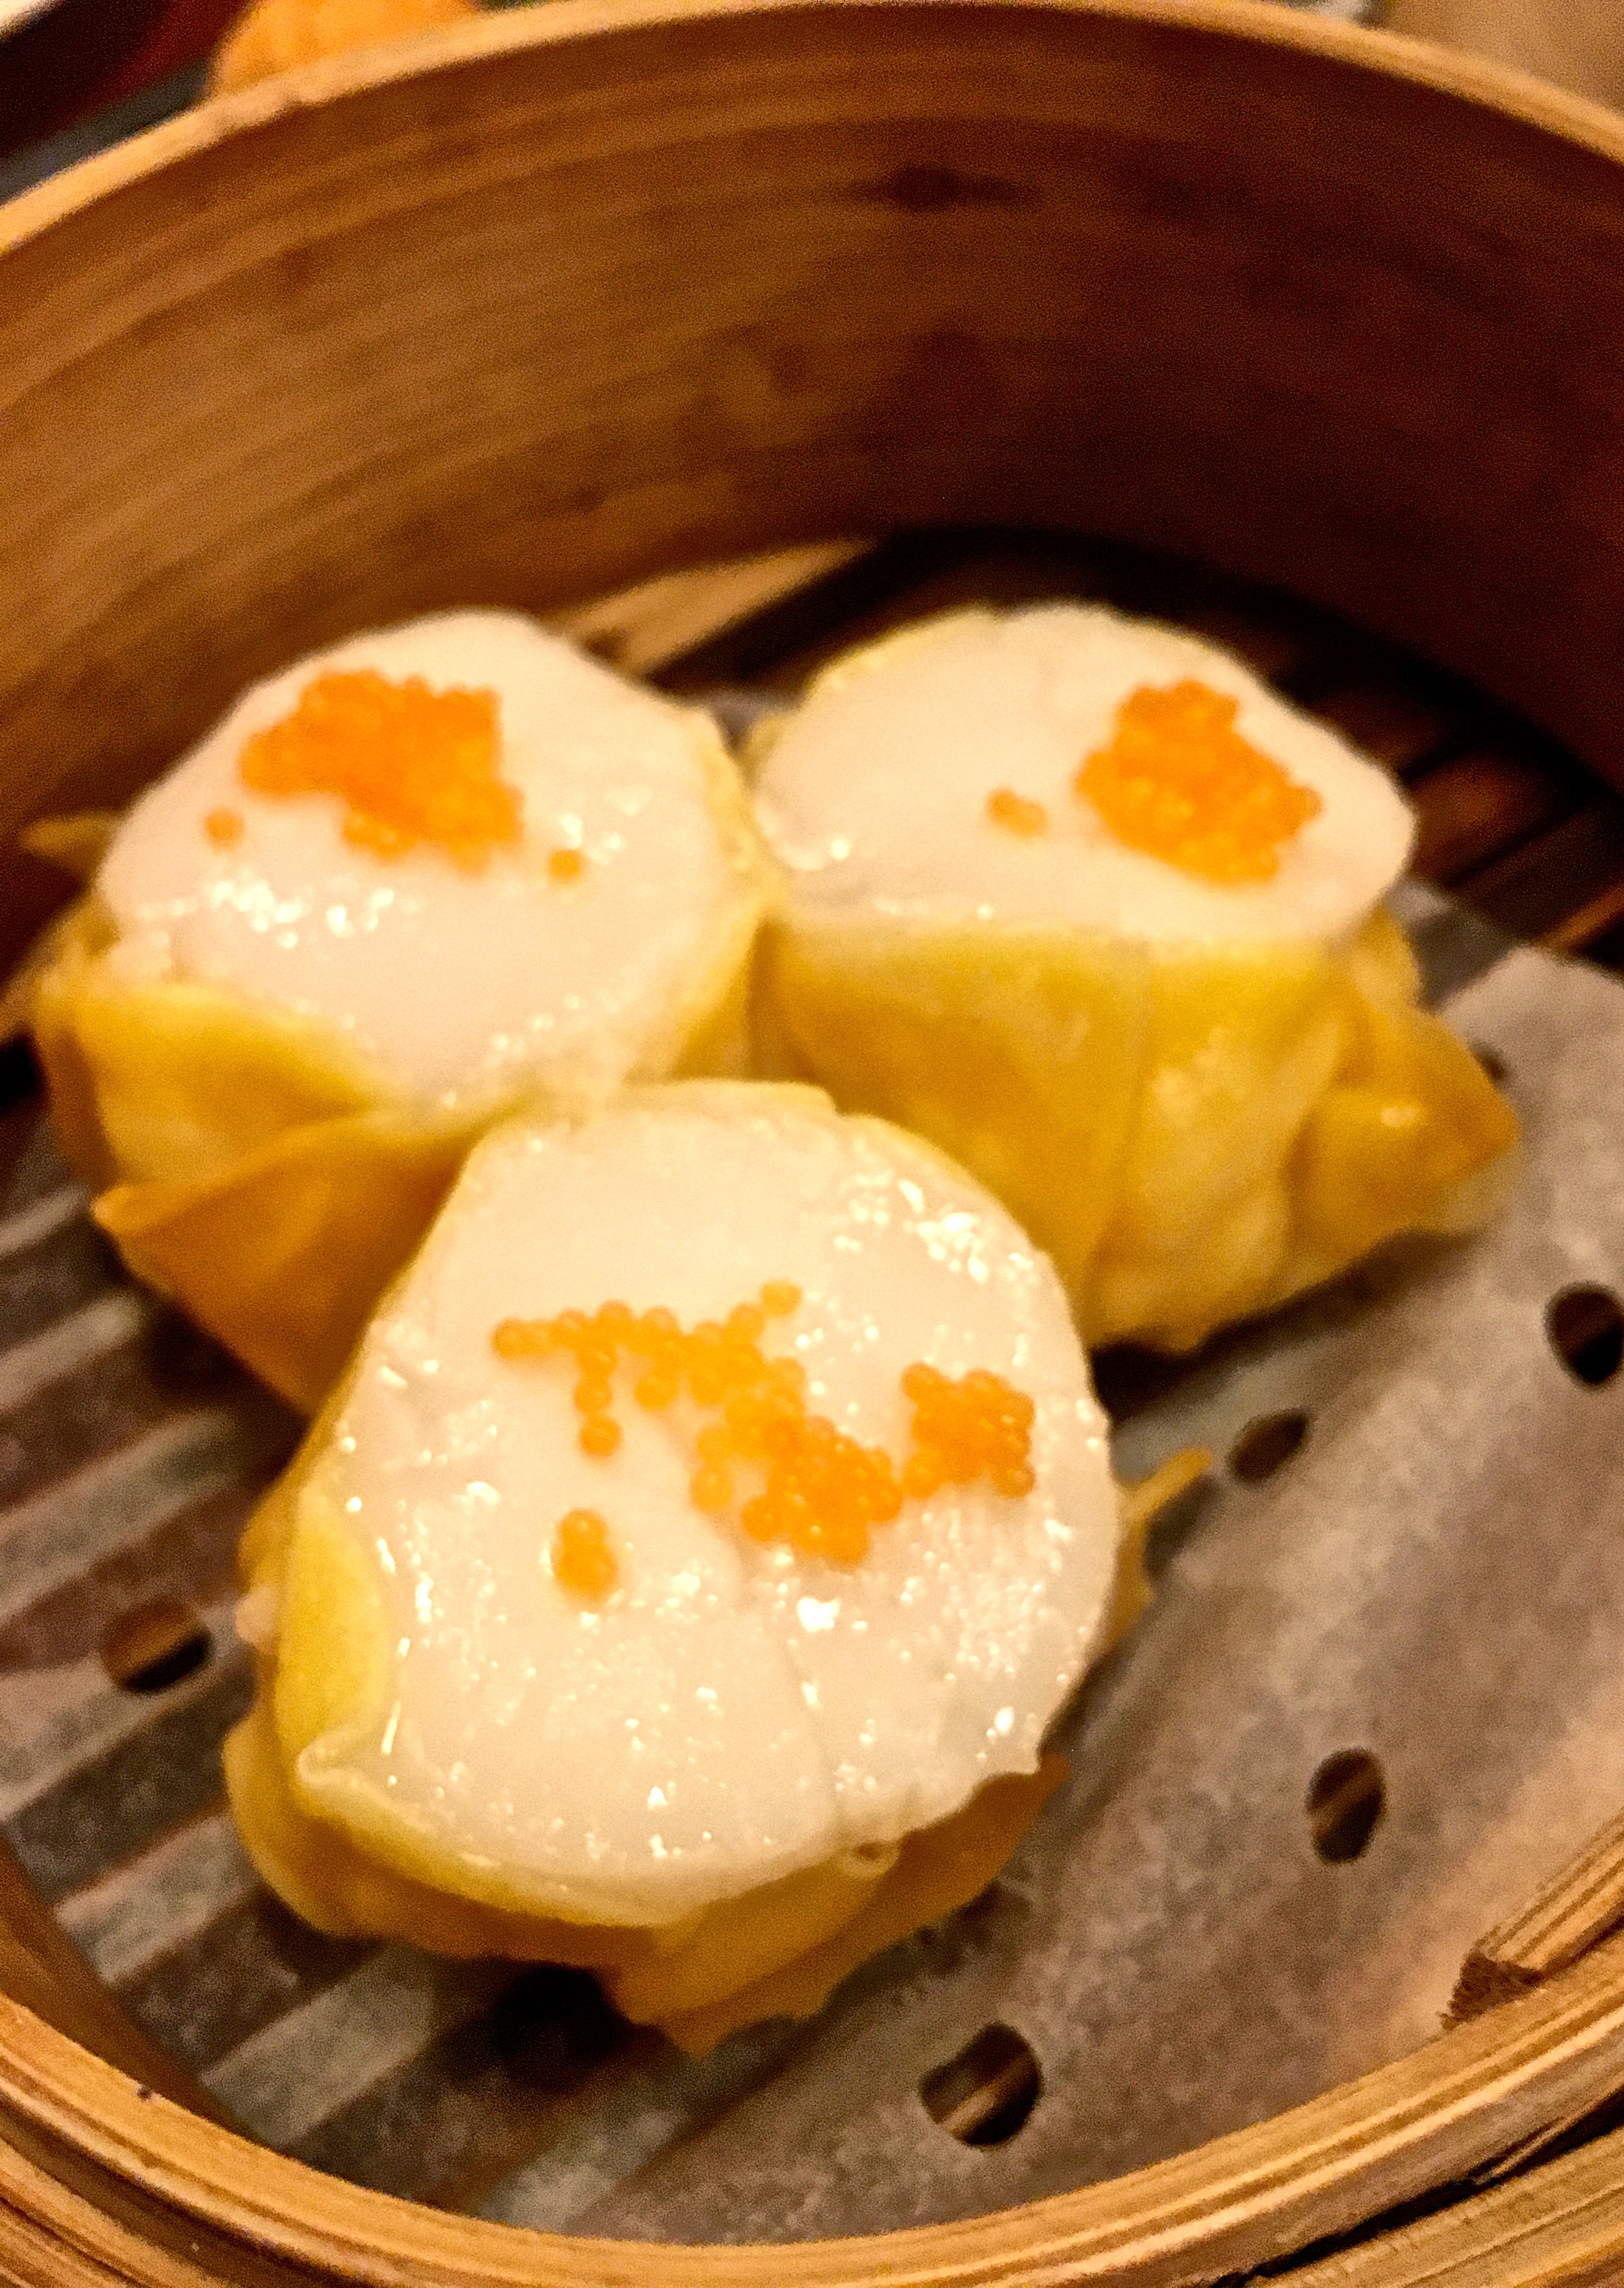 Scallop Shui Mai topped with Tobiko